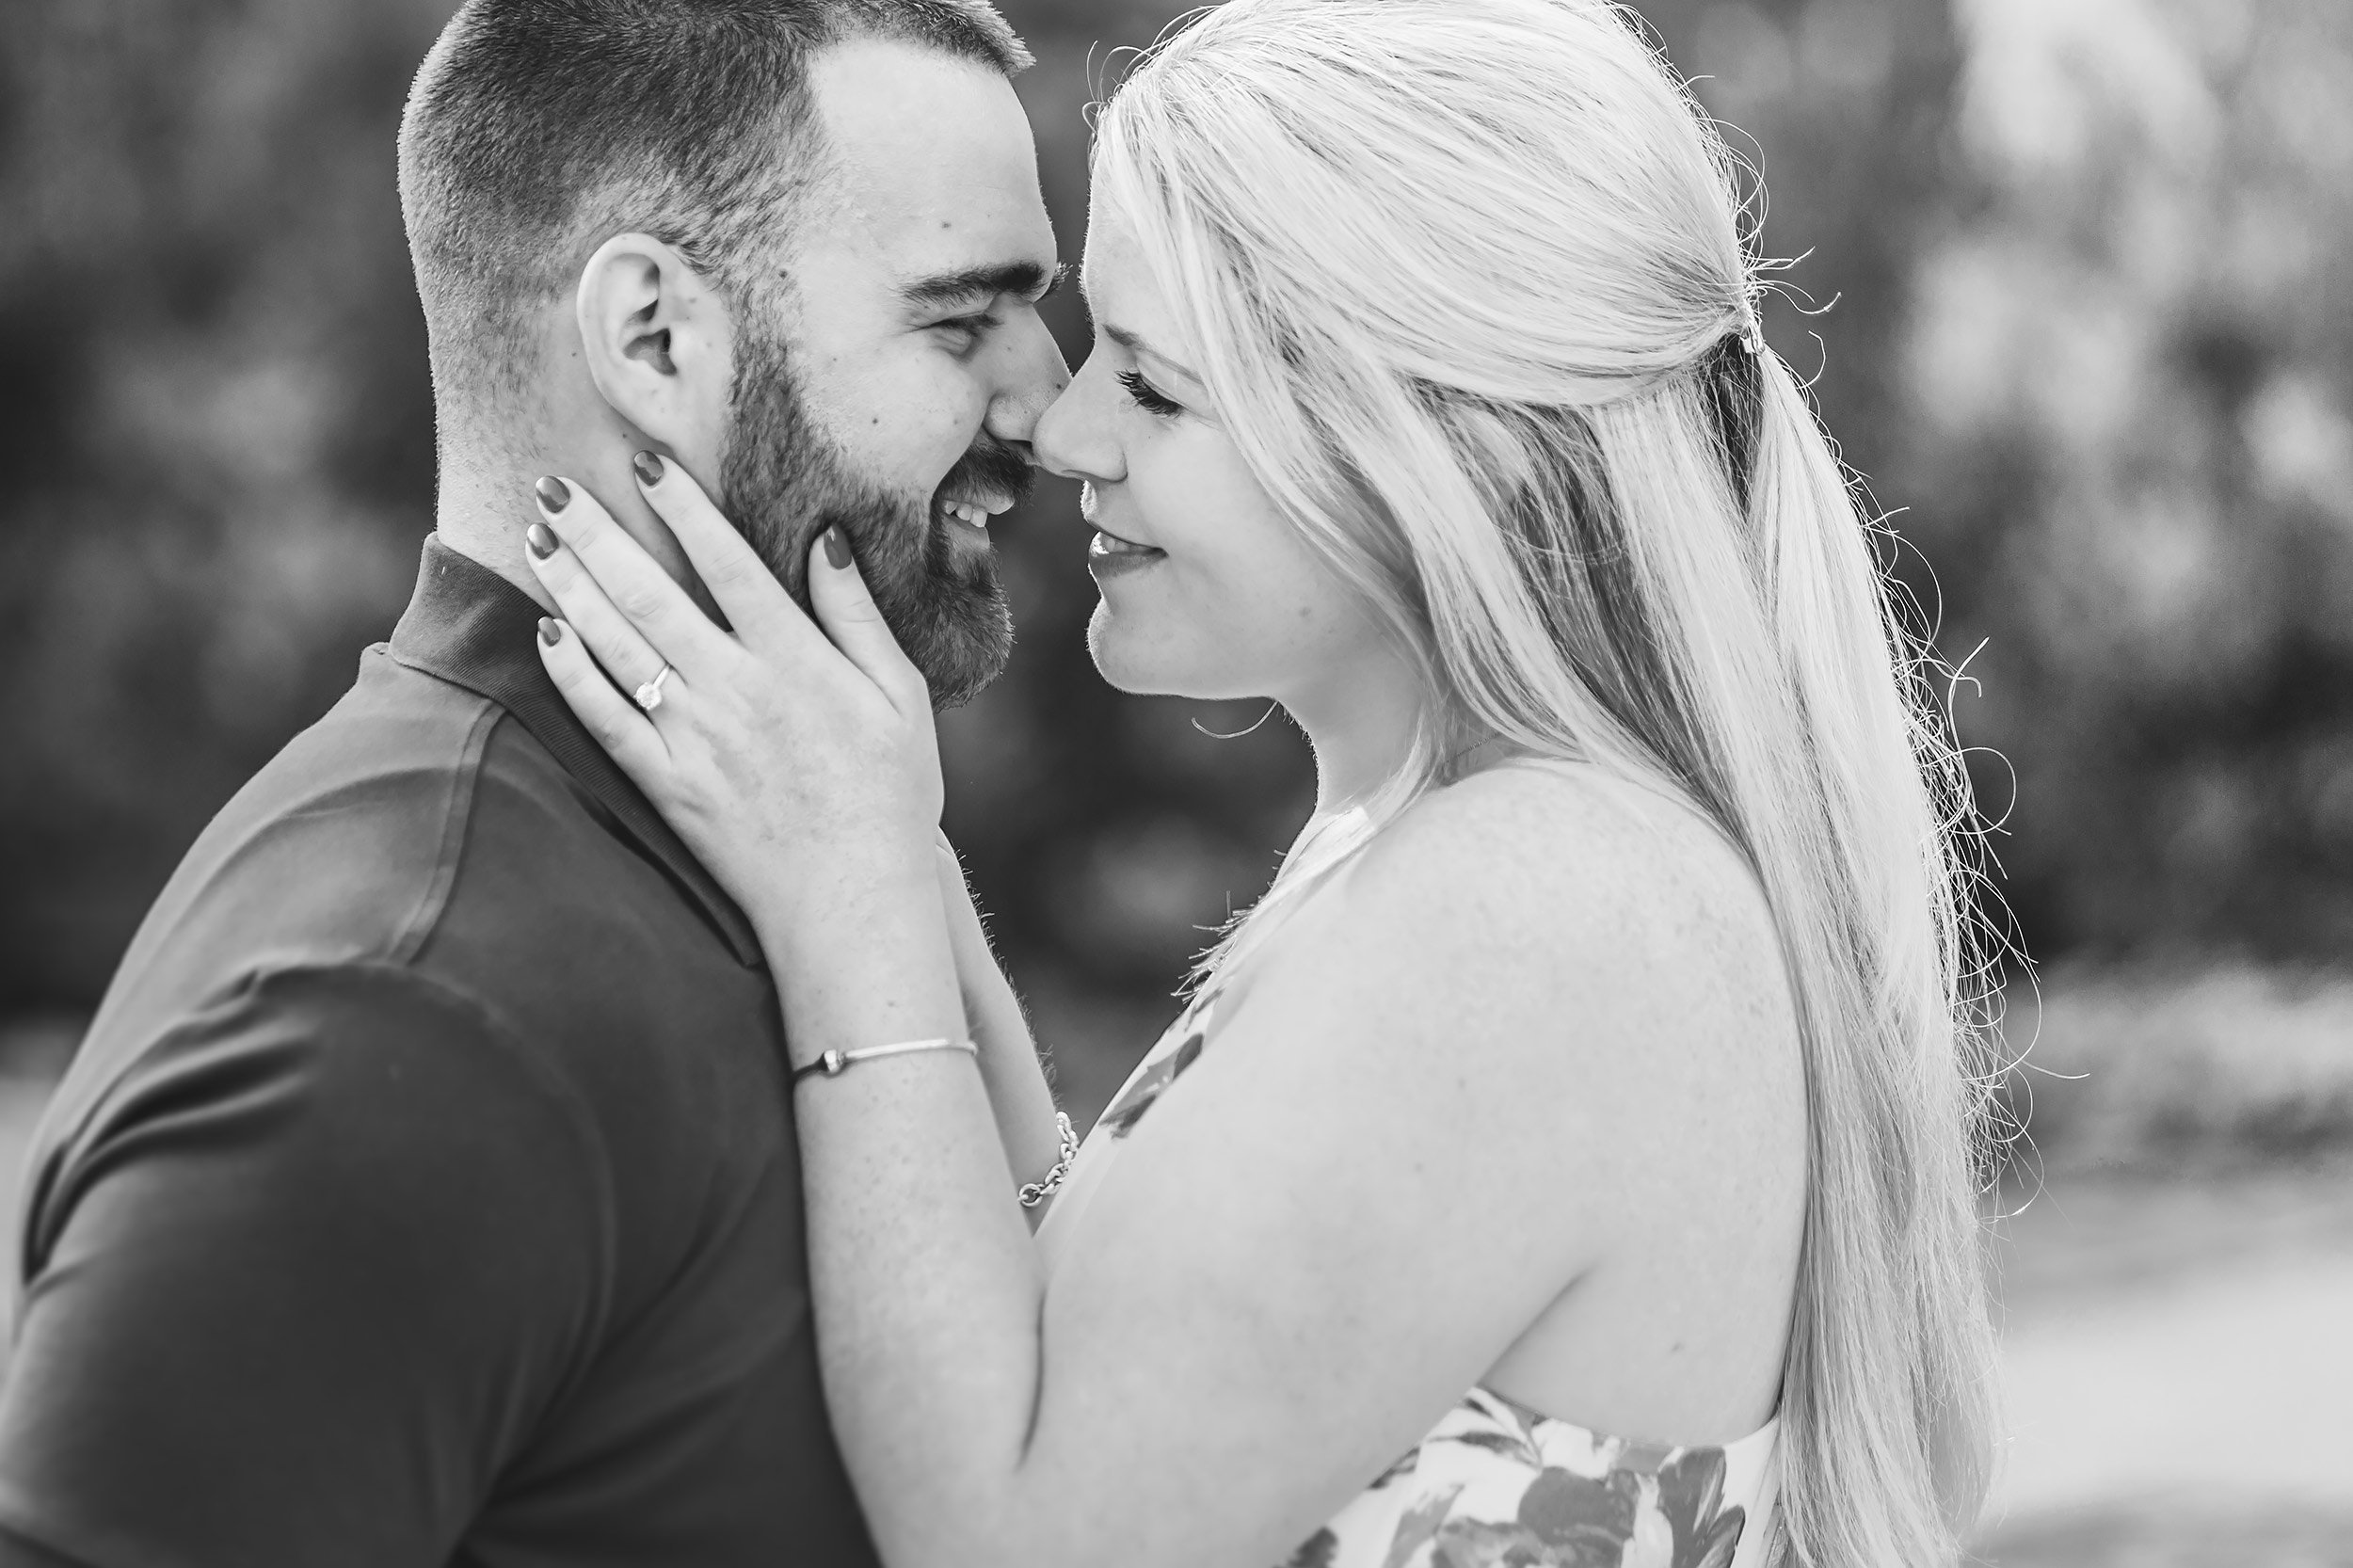 Castle Hill Engagement Session | Stephen Grant Photography